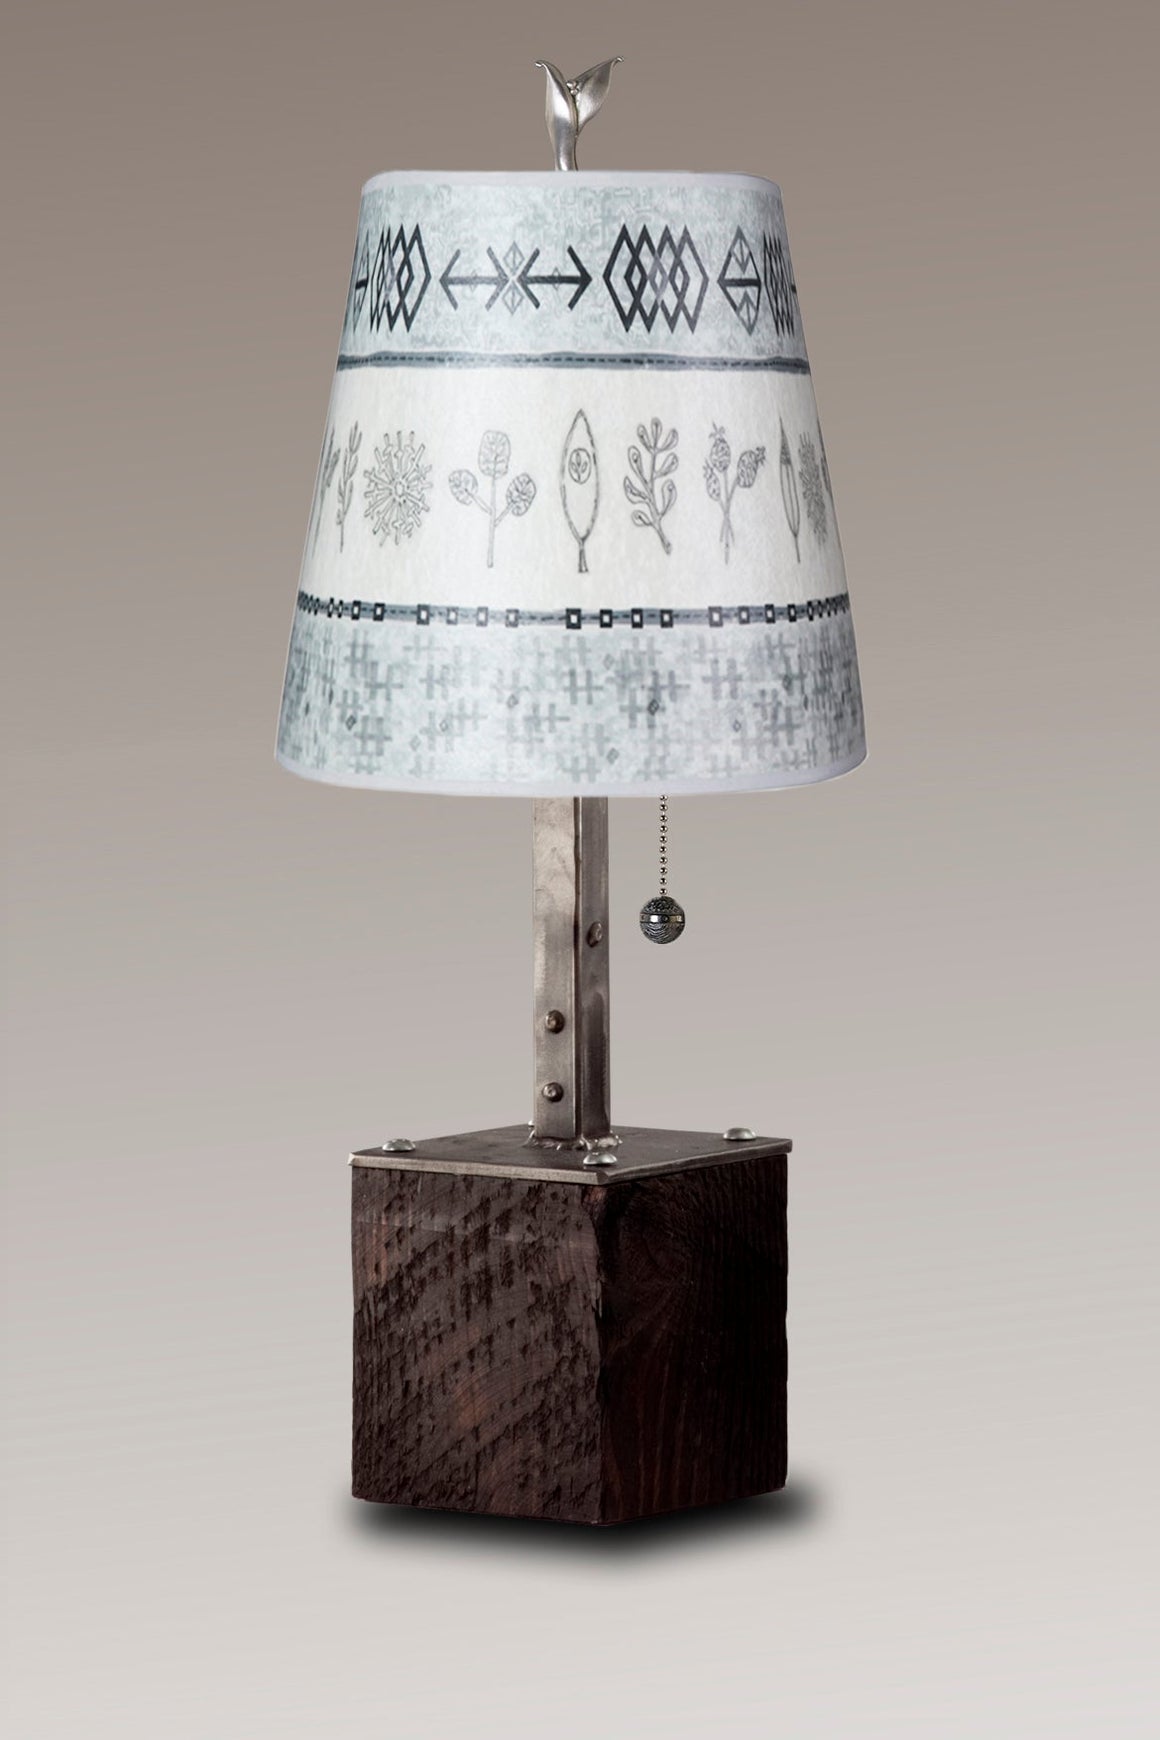 Steel Table Lamp on Reclaimed Wood with Small Drum Shade in Woven & Sprig in Mist